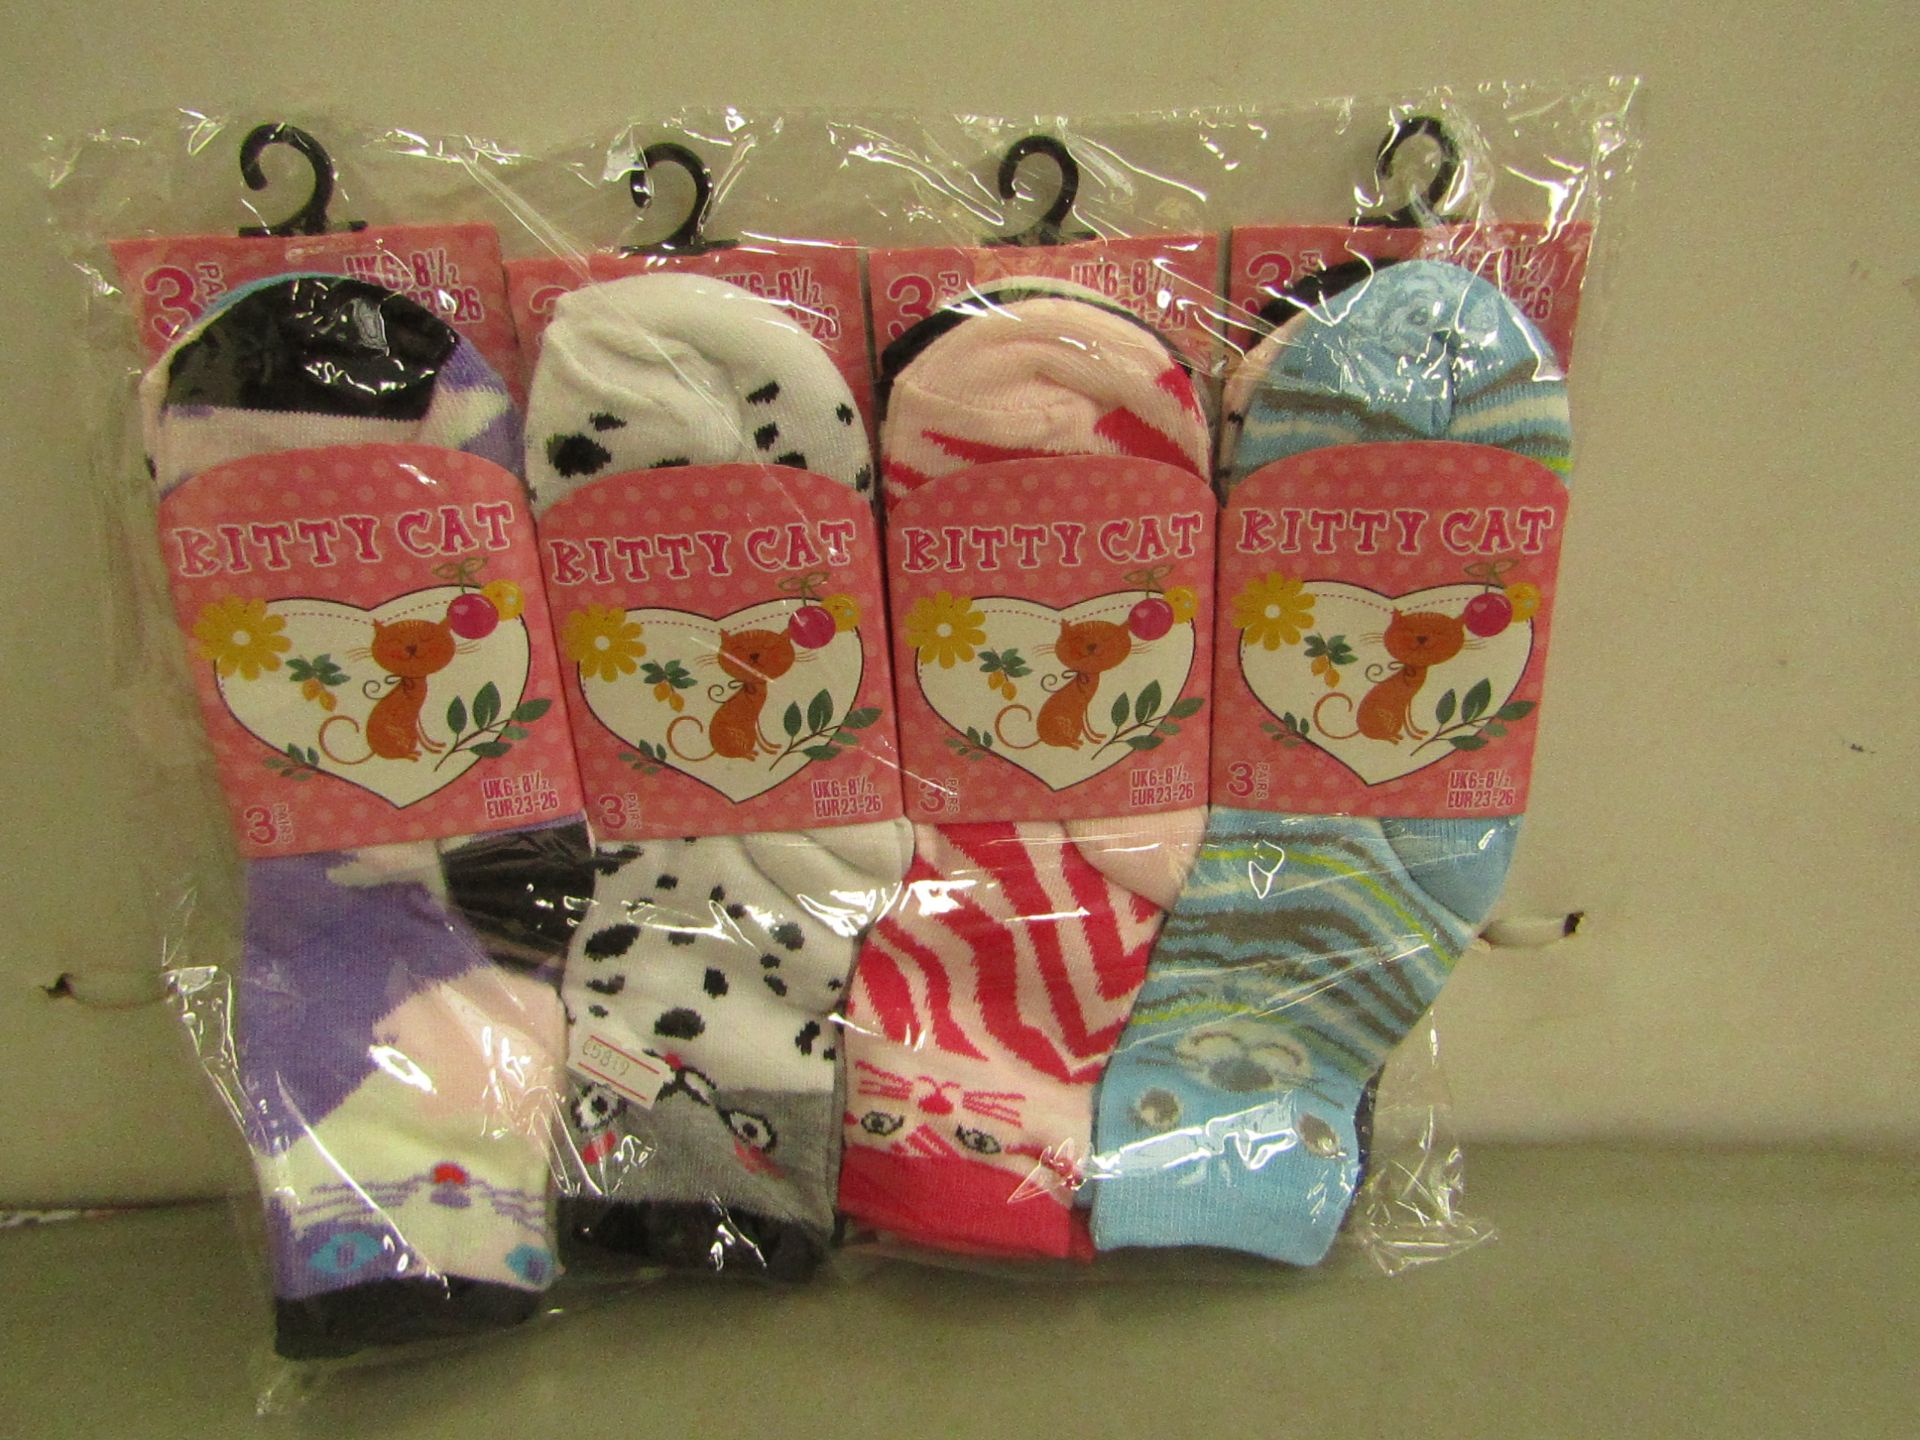 Pack of 12 Childrens Kitty Cat Themed Socks size 6 to 8 1/2 all new in packaging